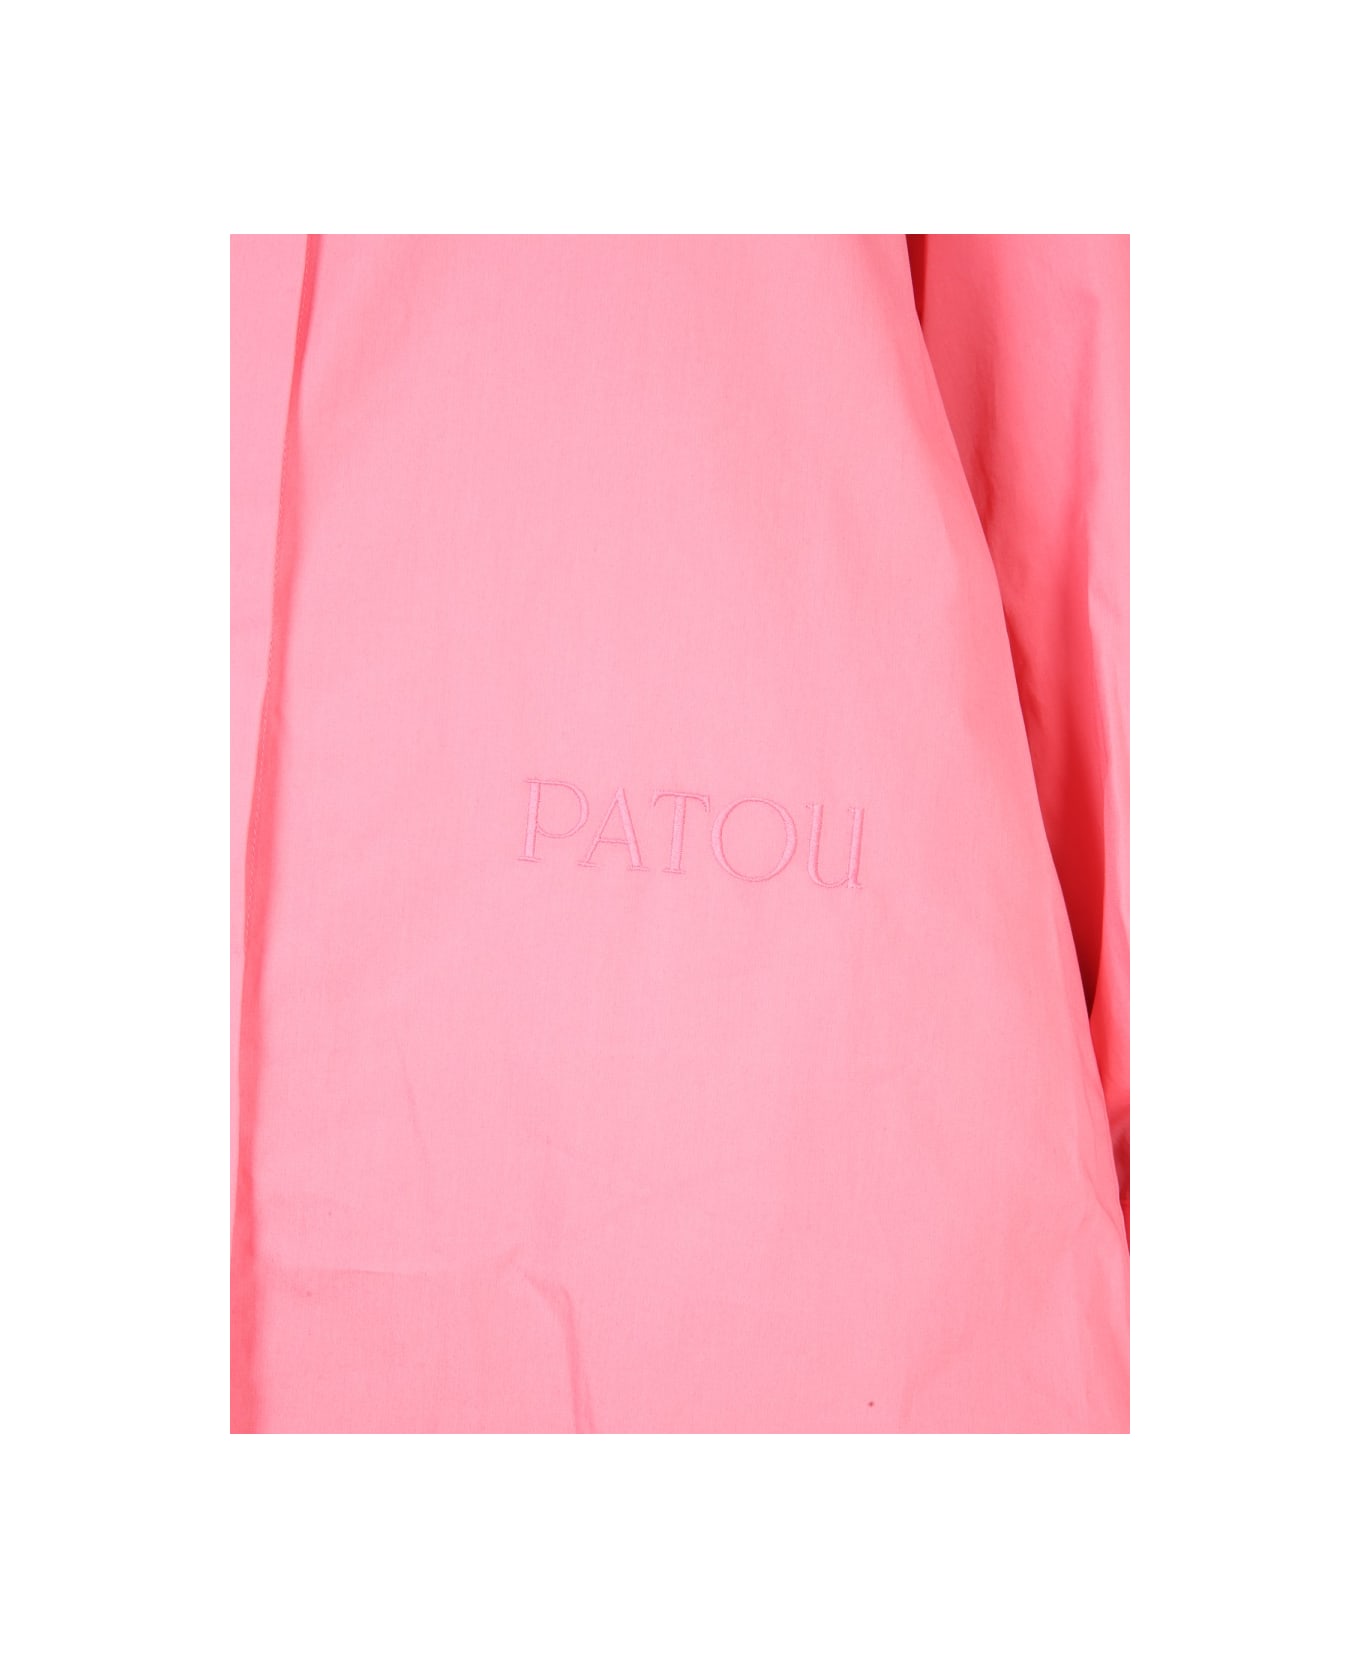 Patou Shirt Dress With Logo Embroidery - PINK ブラウス